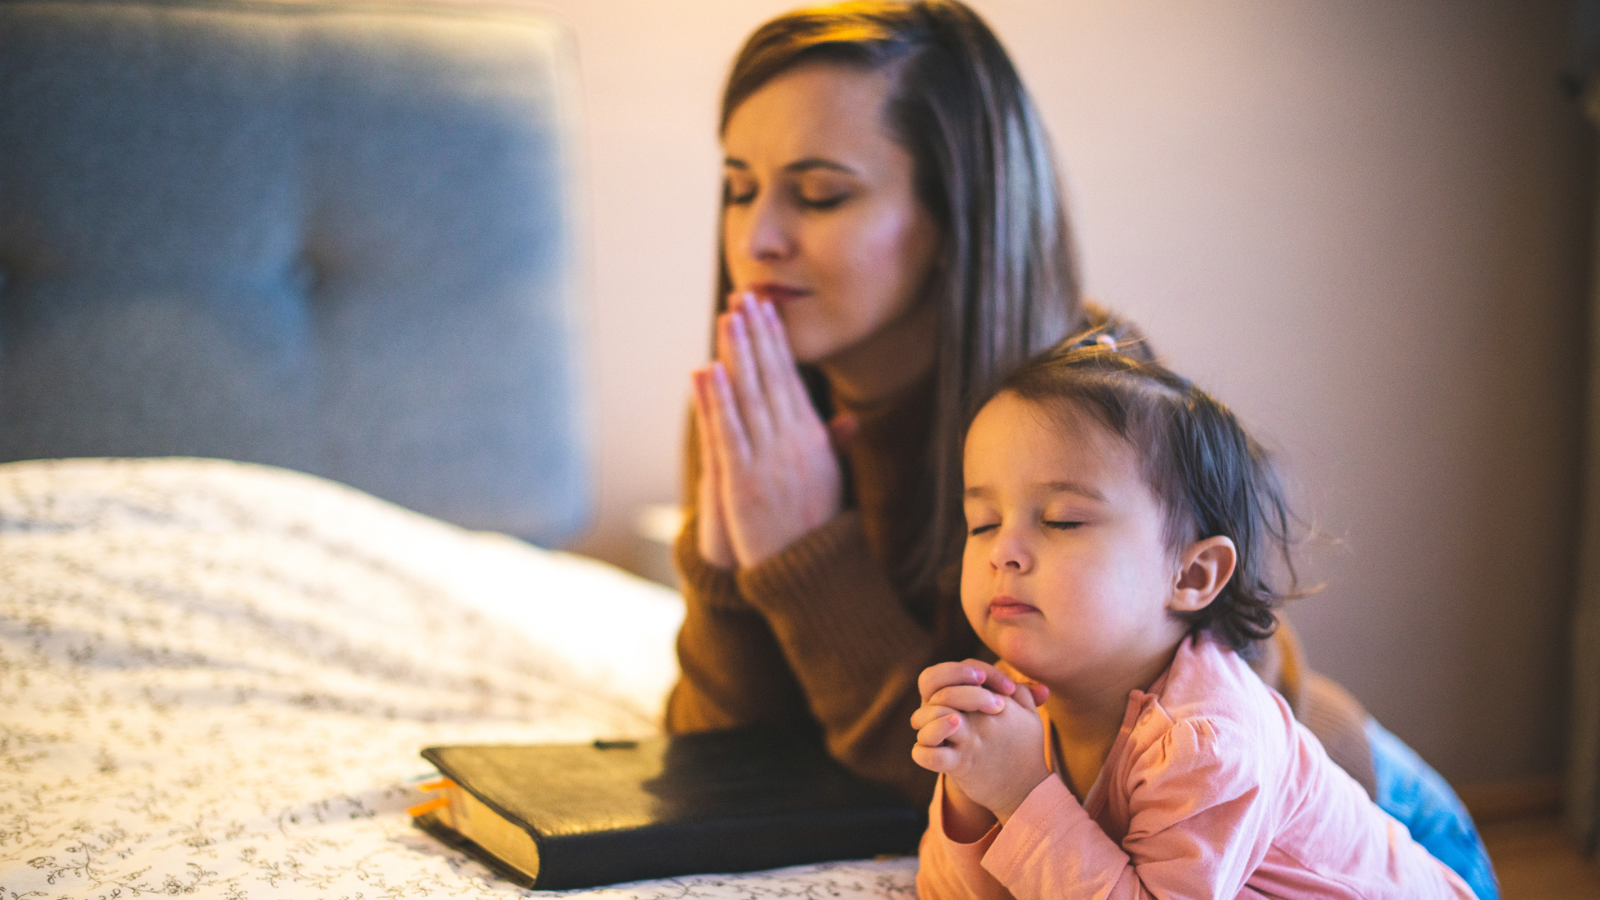 A mom praying with her daughter.